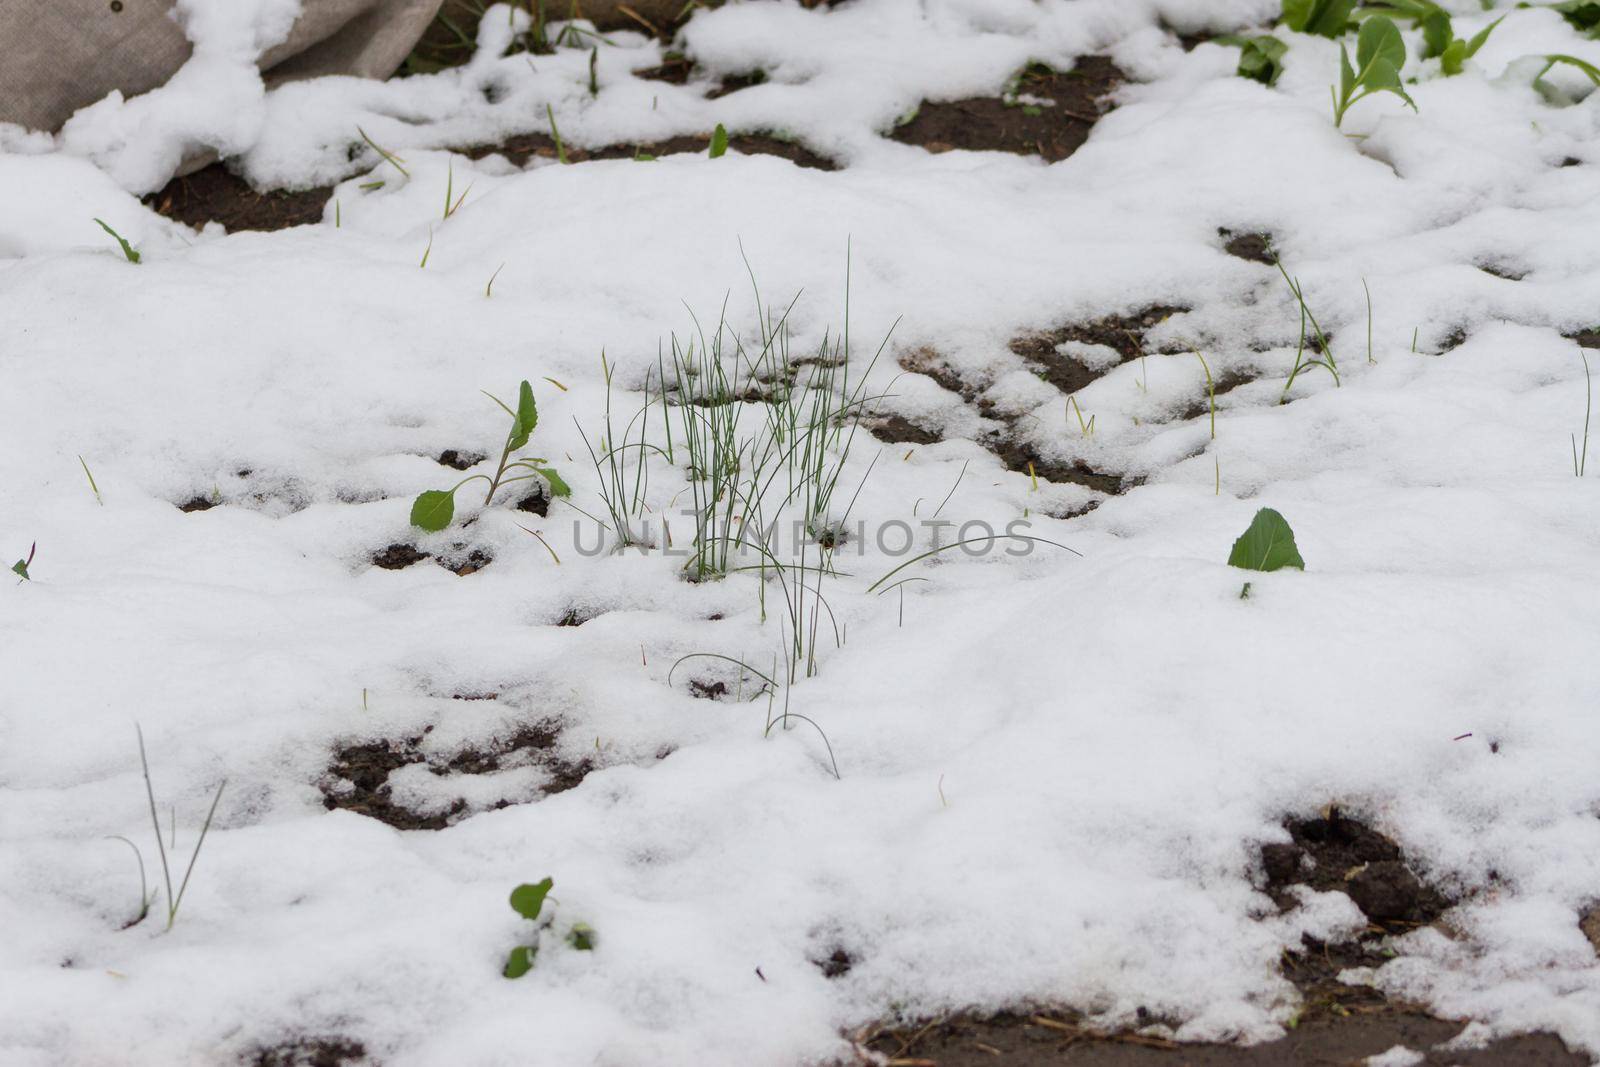 snow covered onion seedlings by GabrielaBertolini